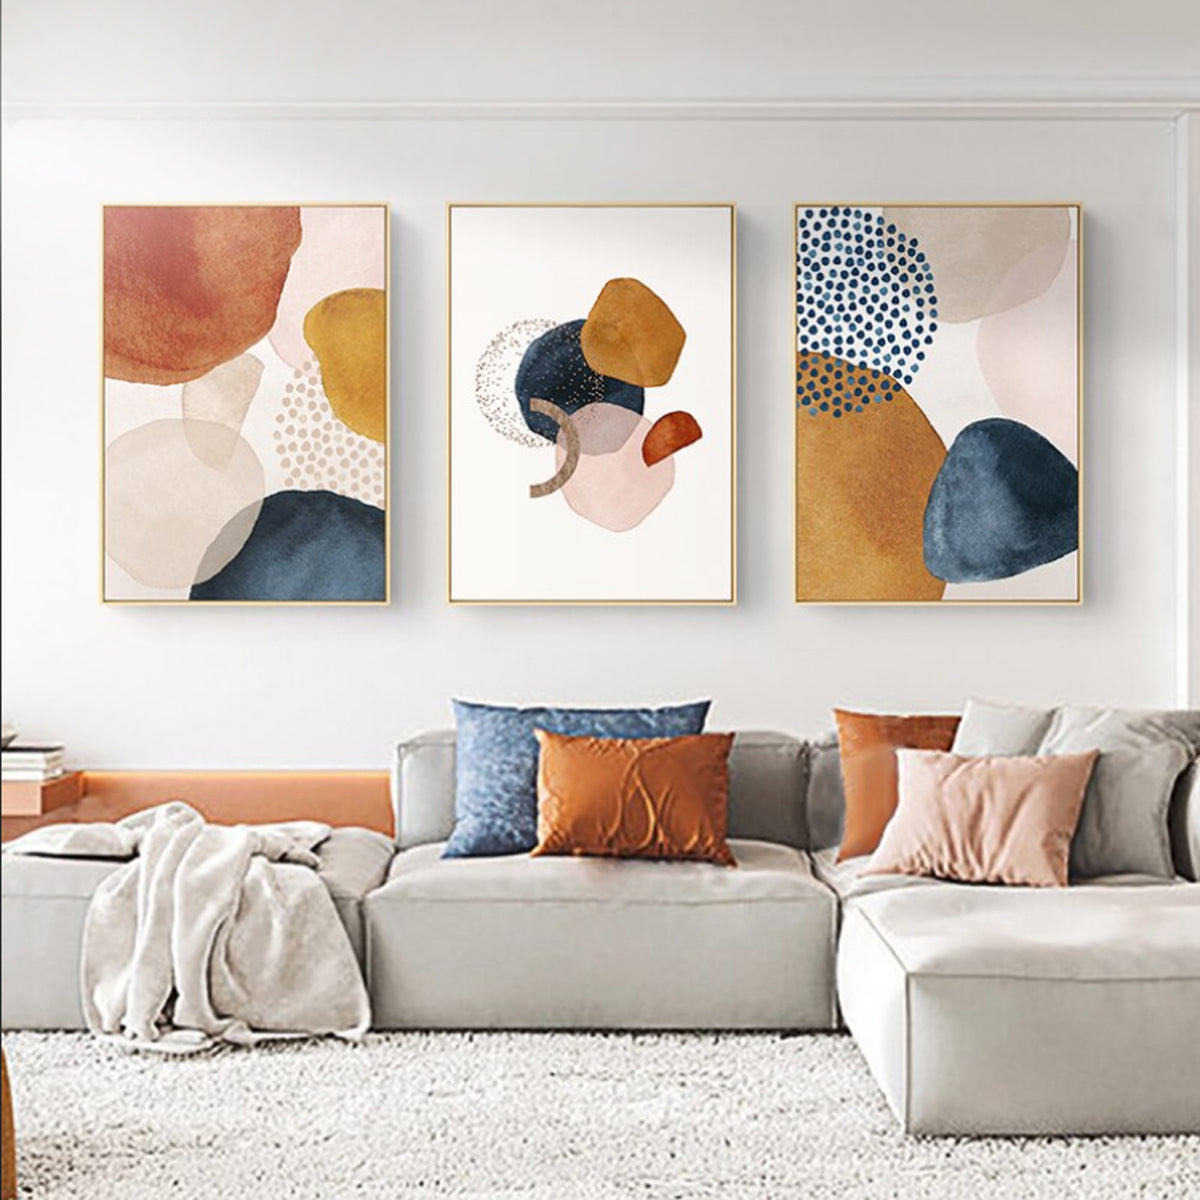 TPFLiving Canvas Art Picture in Abstract – Print Shapes Nordic - Bro Art Traumpreisfabrik